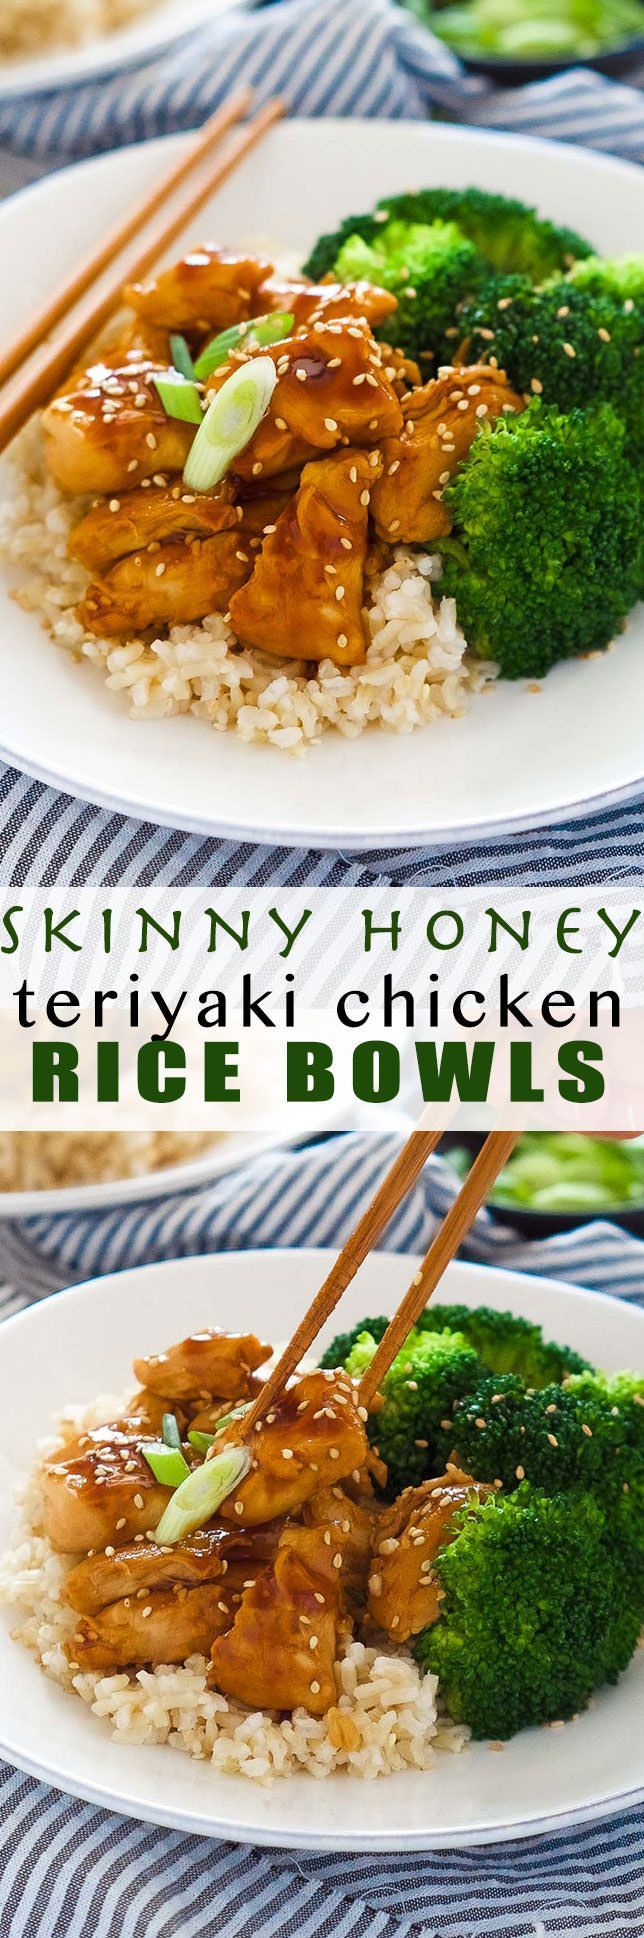 These delicious Skinny Honey Teriyaki Chicken Rice Bowls are a super quick dinner! Tender chicken is saute